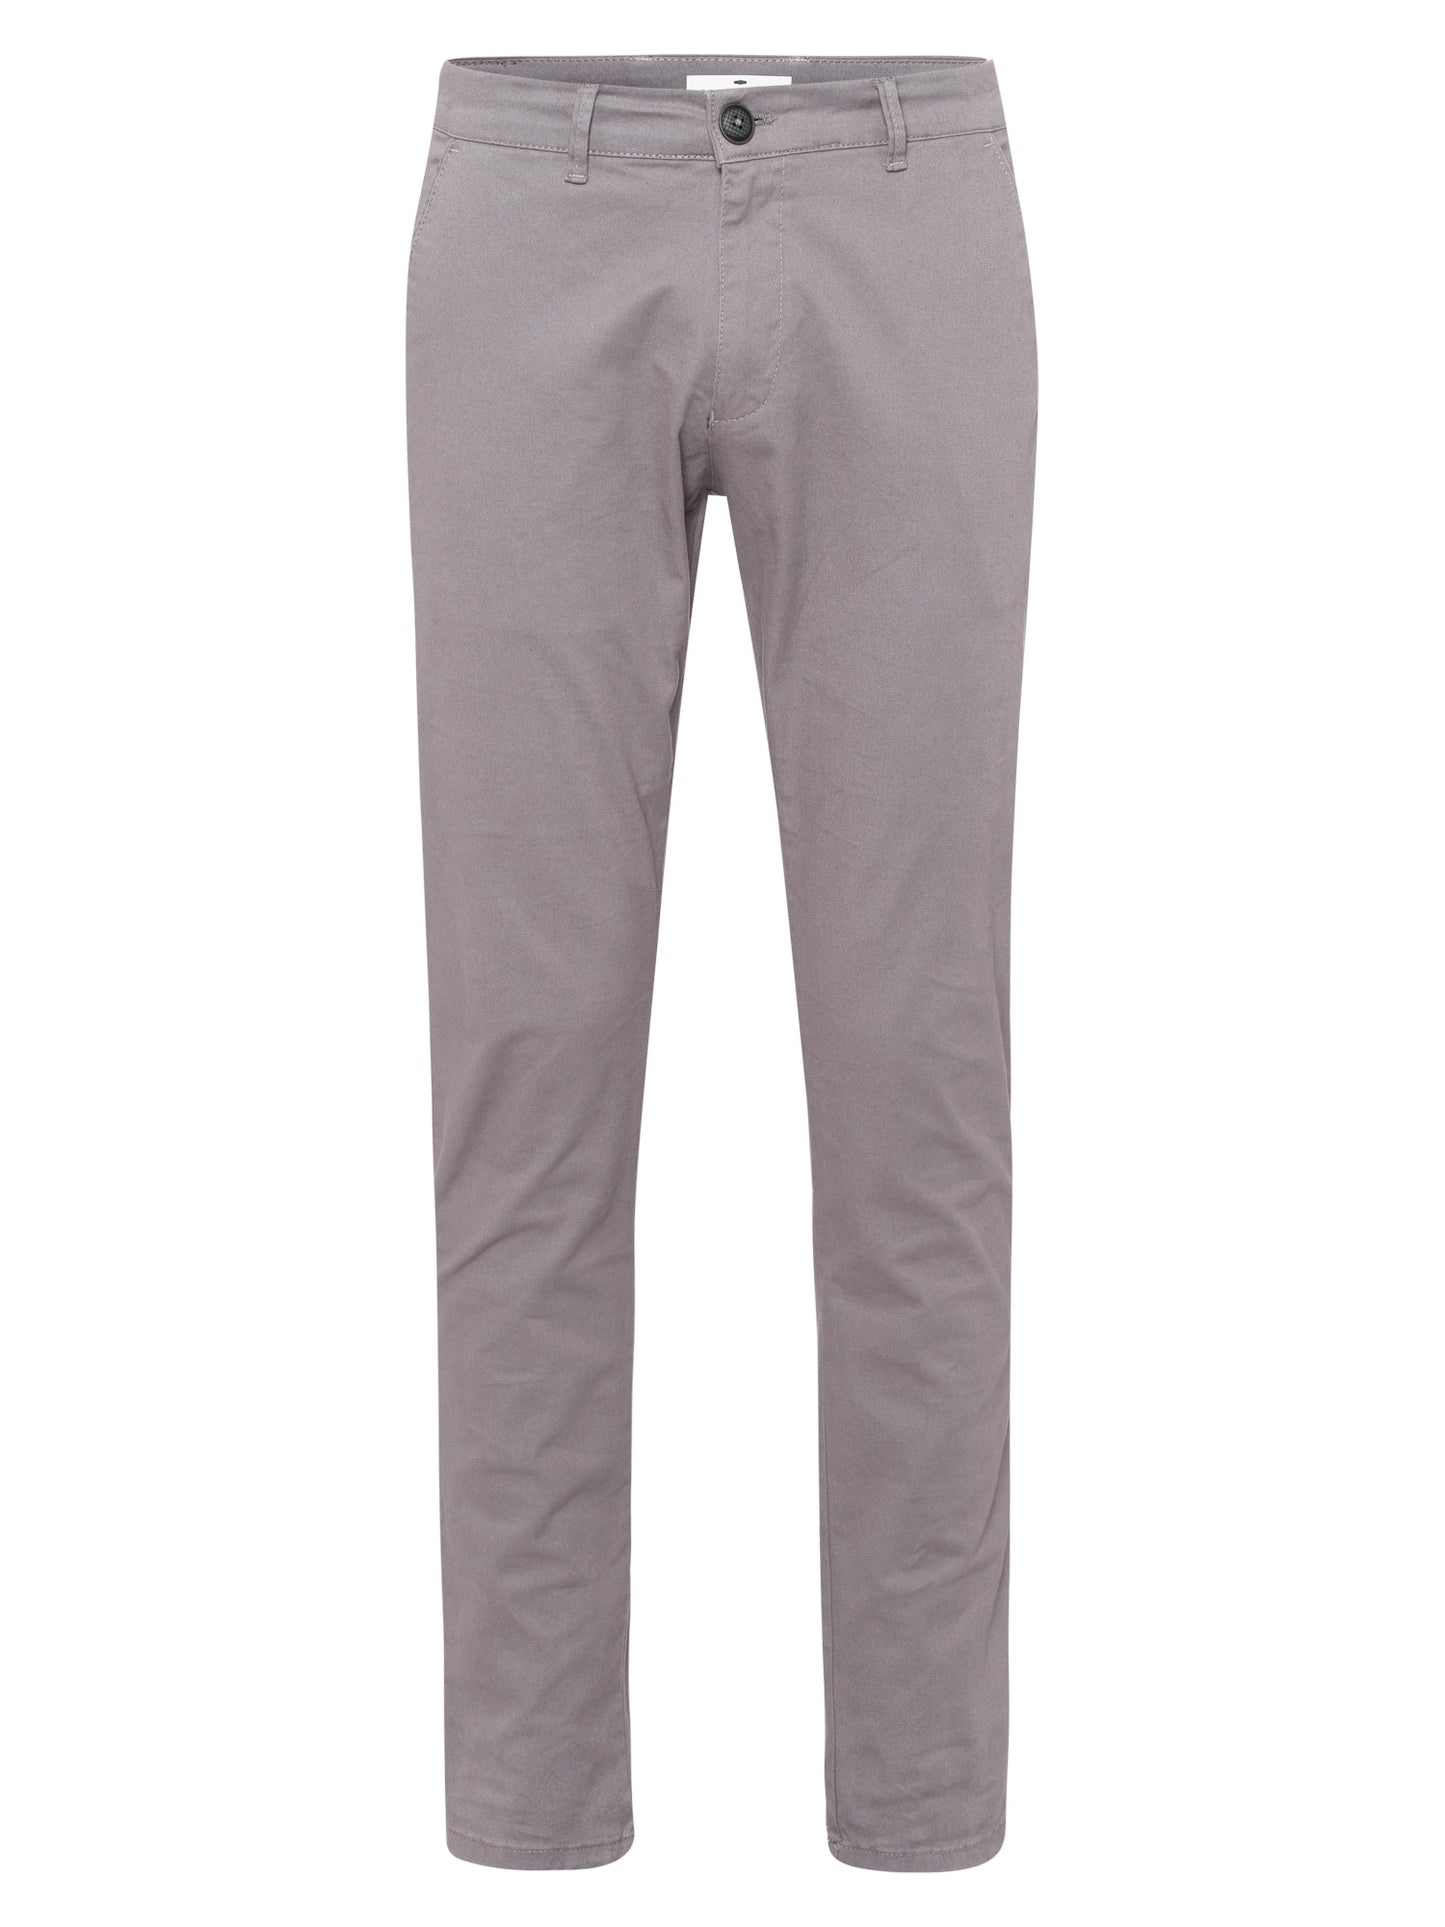 Men's slim tapered fit chinos in grey